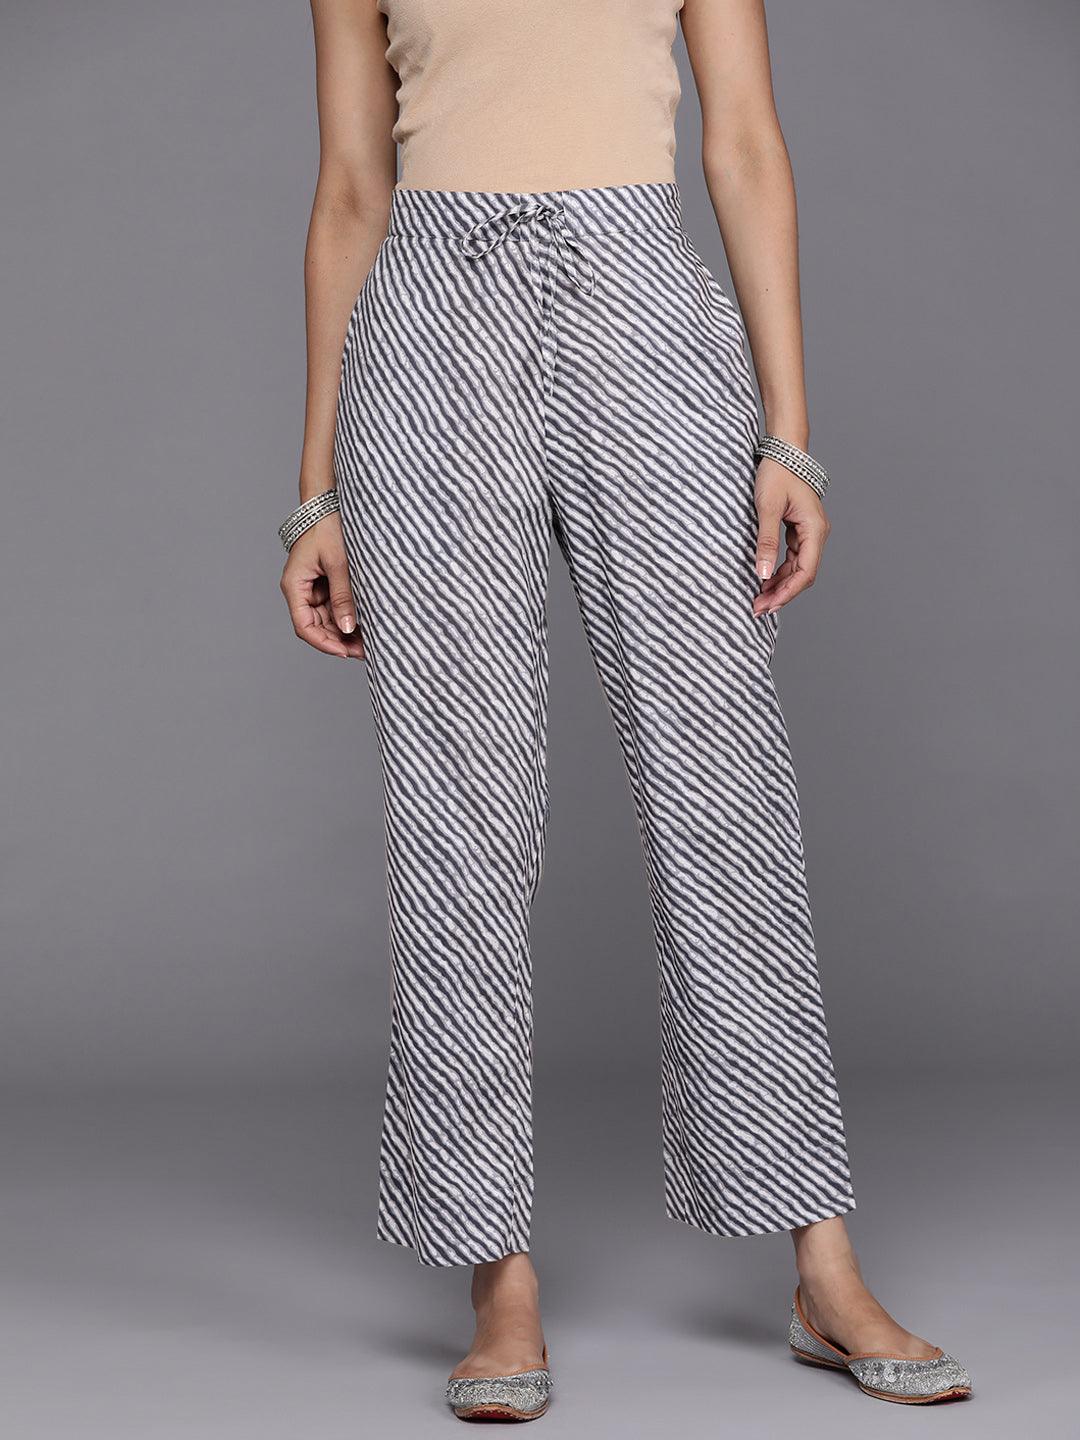 Grey Striped Cotton Trousers